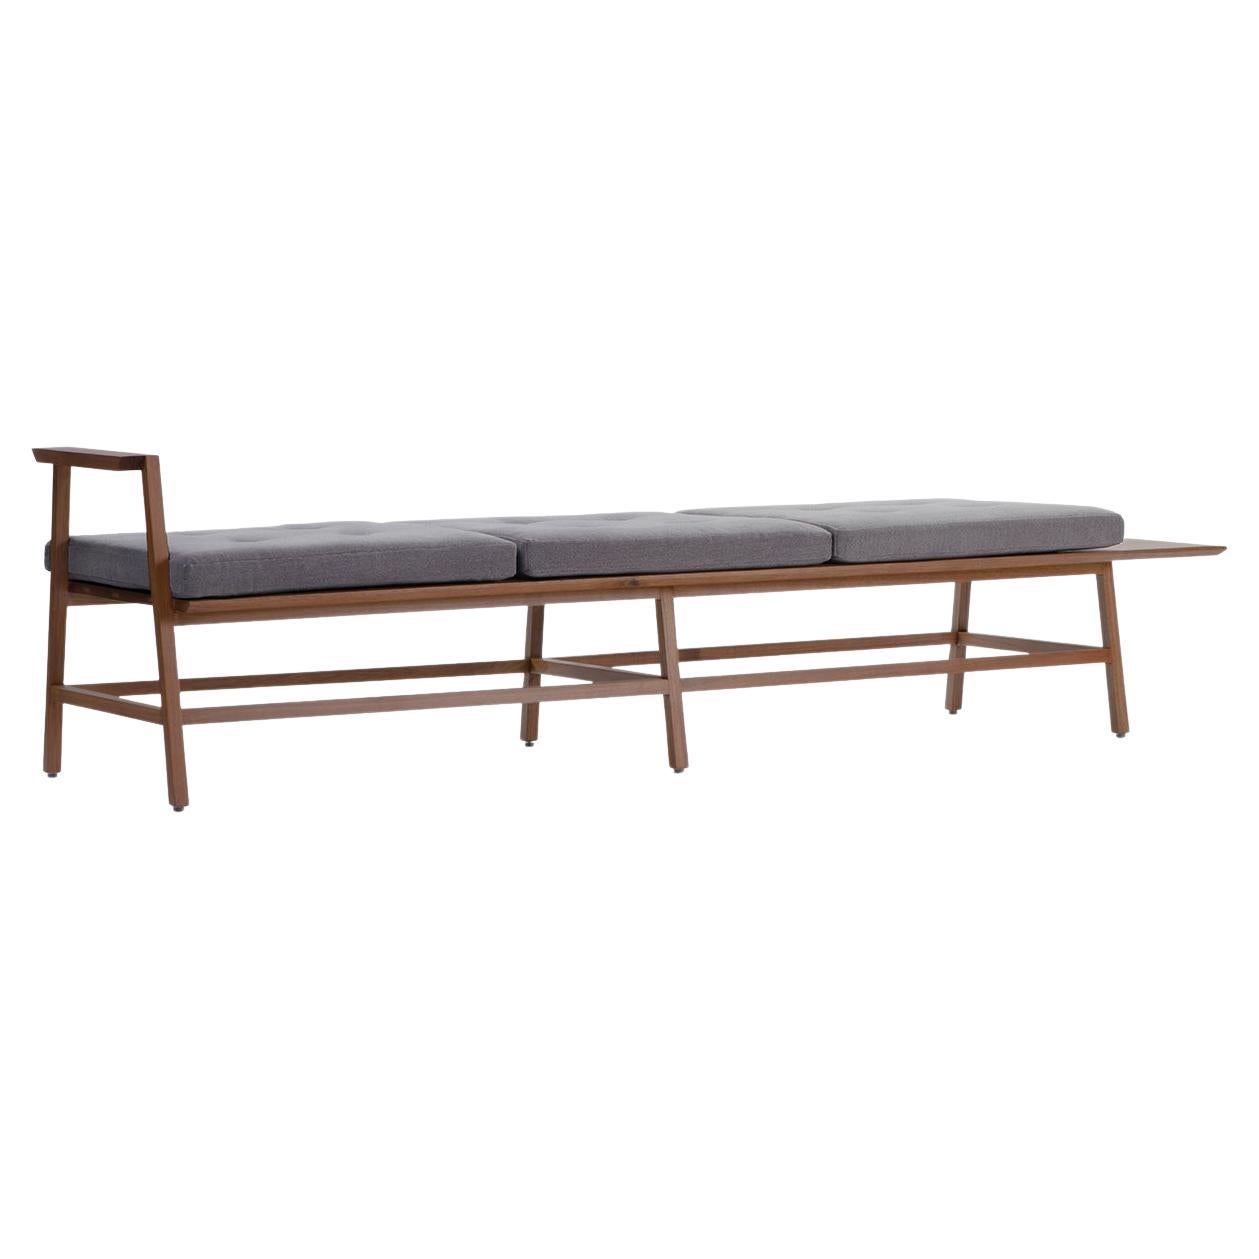 Fabric Banca Dedo, Mexican Contemporary 3-Seat Bench by Emiliano Molina for Cuchara For Sale